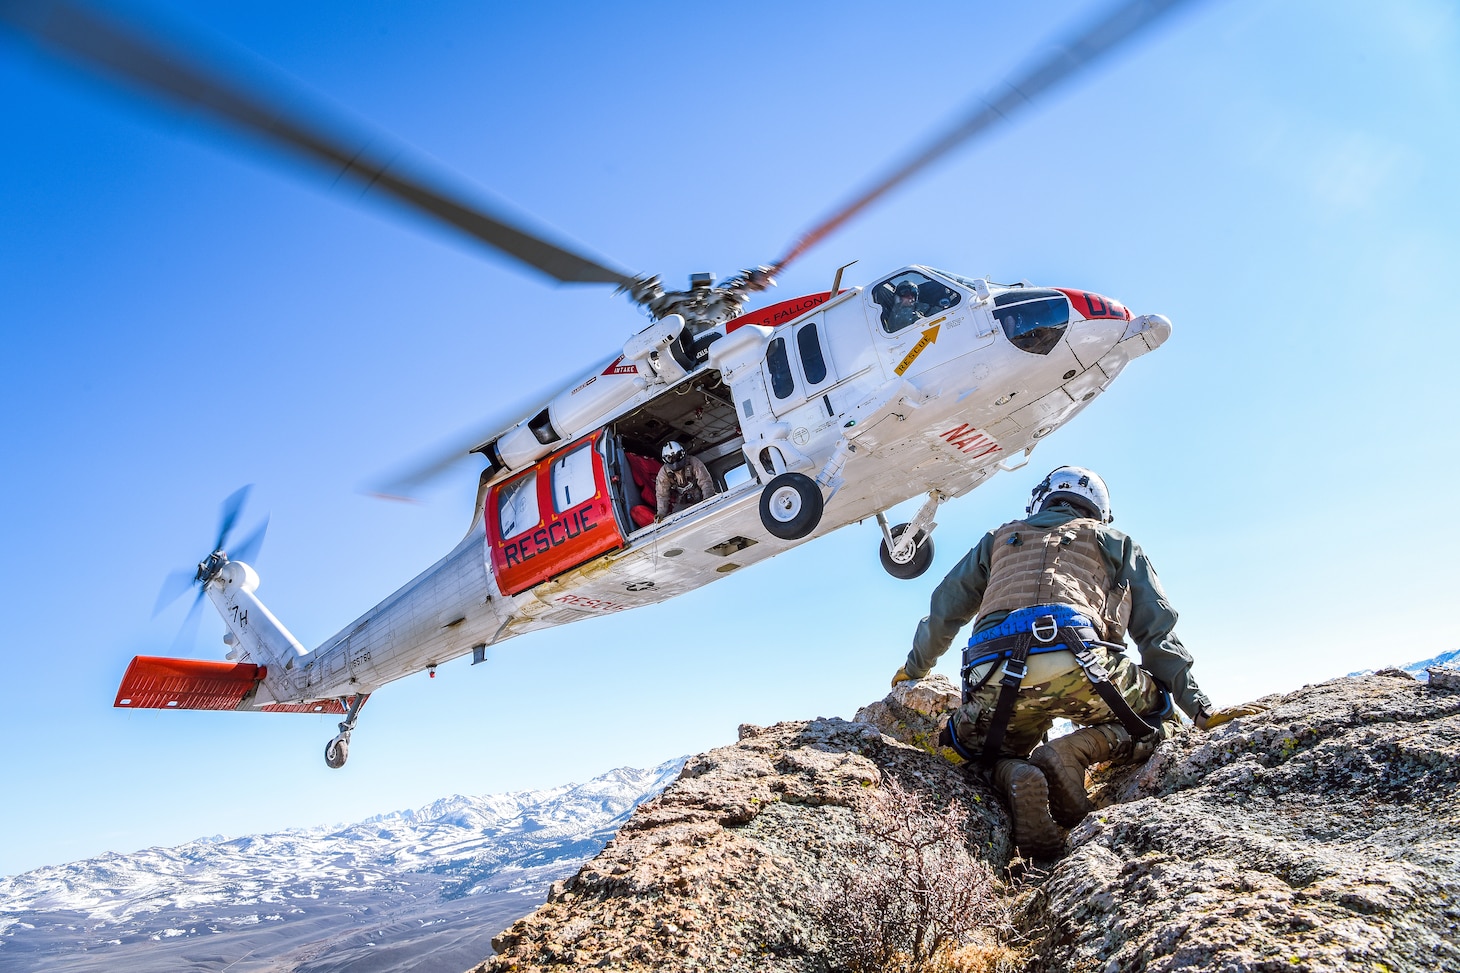 Navy Helicopter Crew Rescued After Crash Near Mt Hogue, CA Mirage News